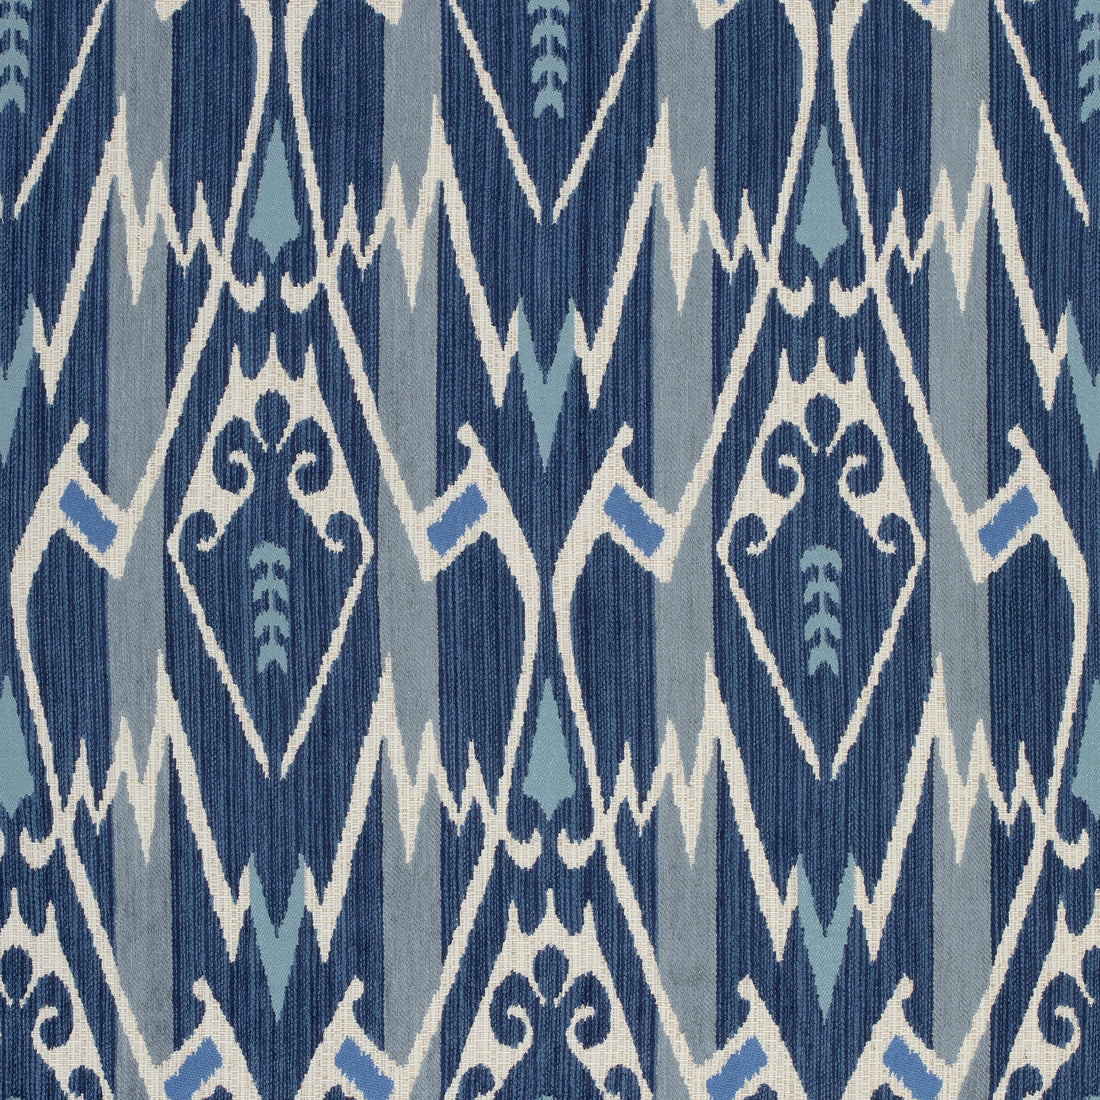 Nomad fabric in blue color - pattern number W73368 - by Thibaut in the Nomad collection